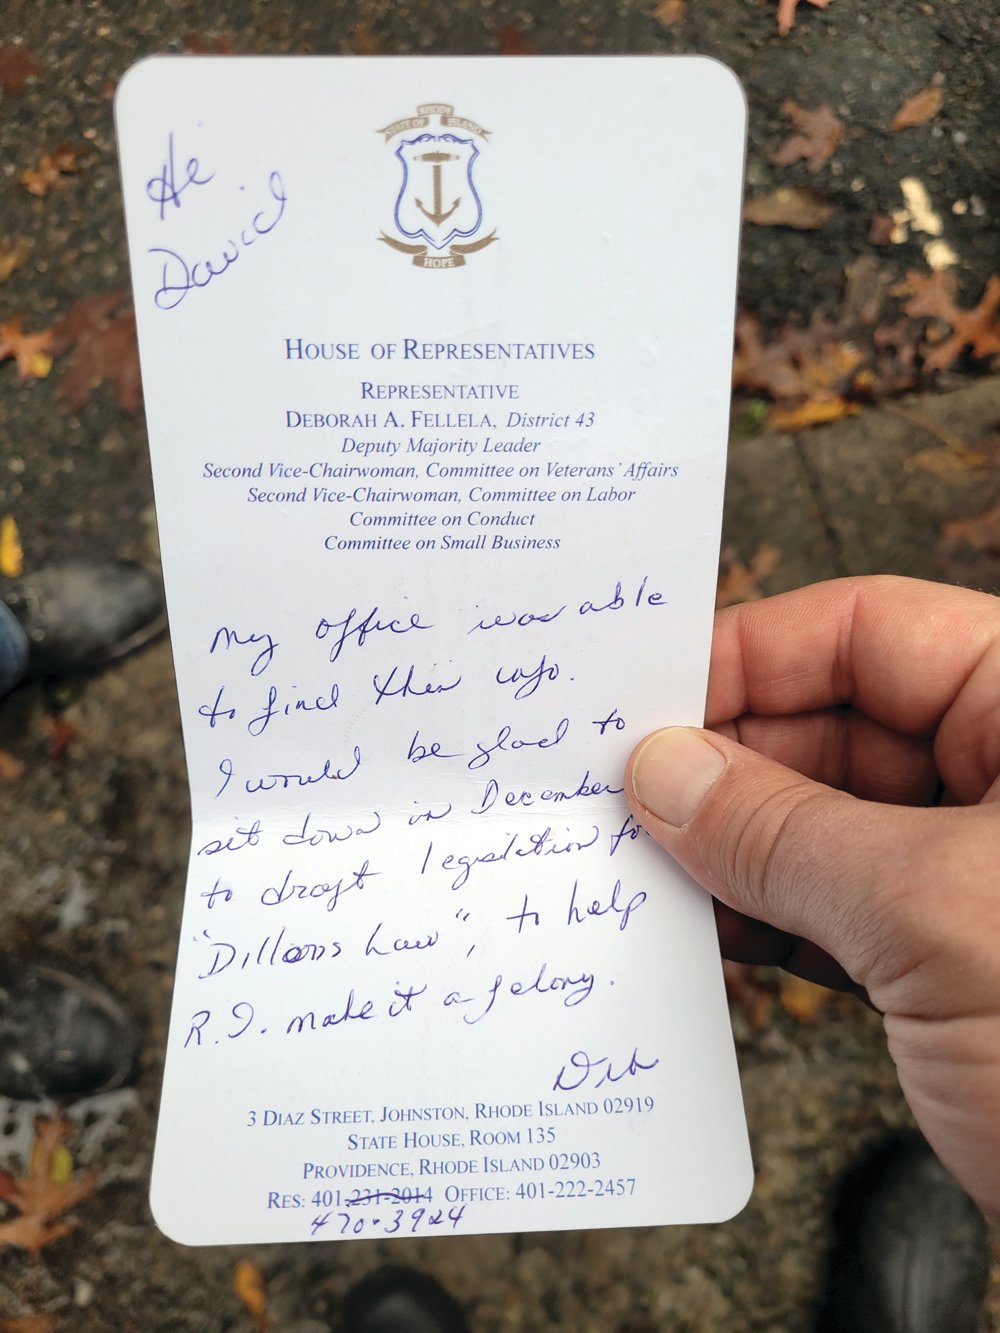 NOTE FROM A LEGISLATOR: Rhode Island state Rep. Deborah A. Fellela, District-43 (Johnston) recently wrote in a note to David Viens, promising to help draft “Dillon’s Law,” which would make unlawful gun storage resulting in death or injury a felony, rather than a misdemeanor.